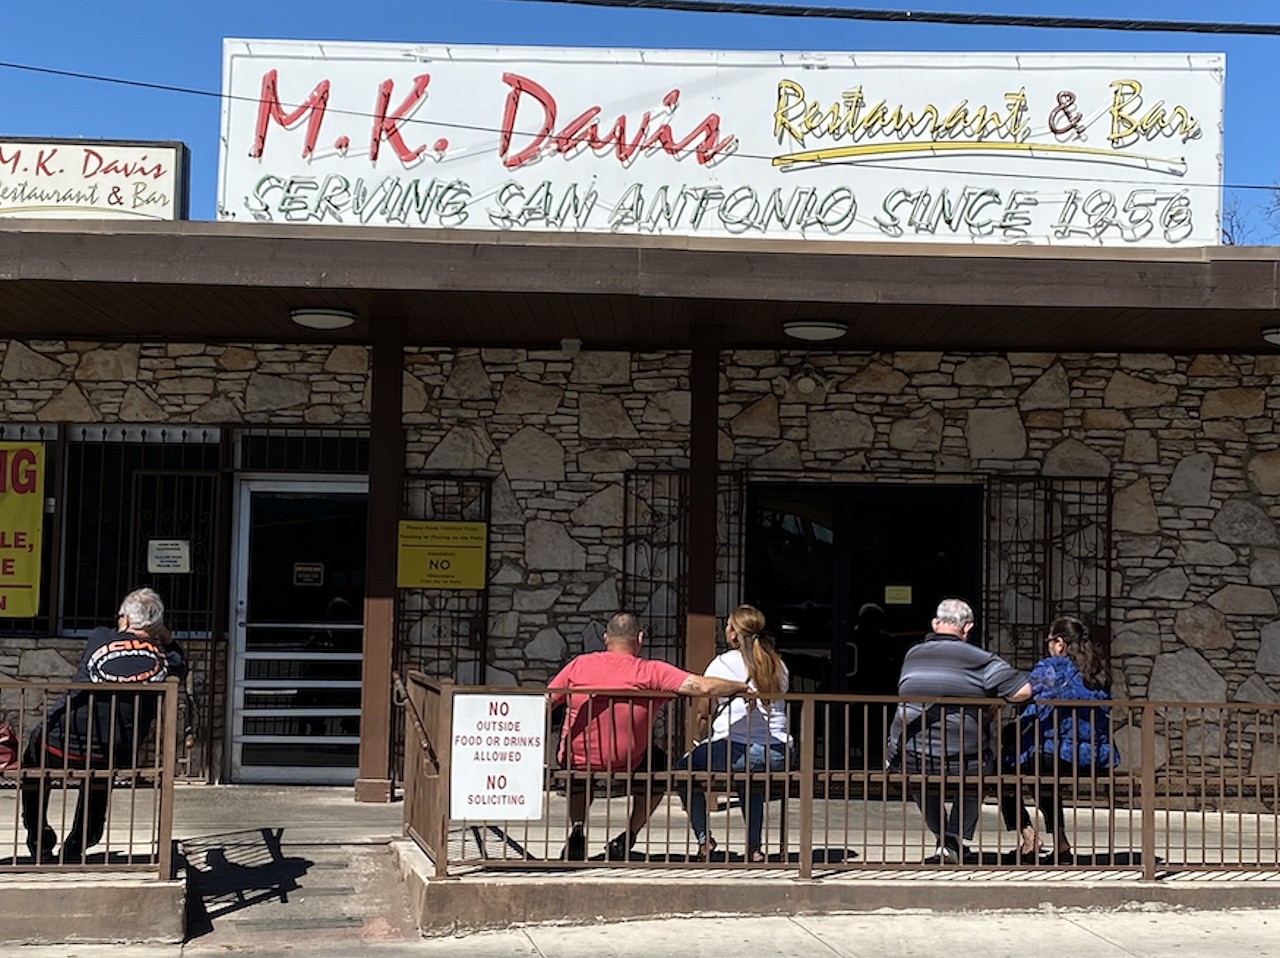 M.K. Davis Restaurant & Bar, 1956
1302 N. Flores St., (210) 223-1208, facebook.com/mkdavisrestaurant
This family-owned restaurant has been serving up steaks, seafood and Mexican food to hungry San Antonians since 1956. Take advantage of their lunch specials or stop in for a couple drinks from the bar!